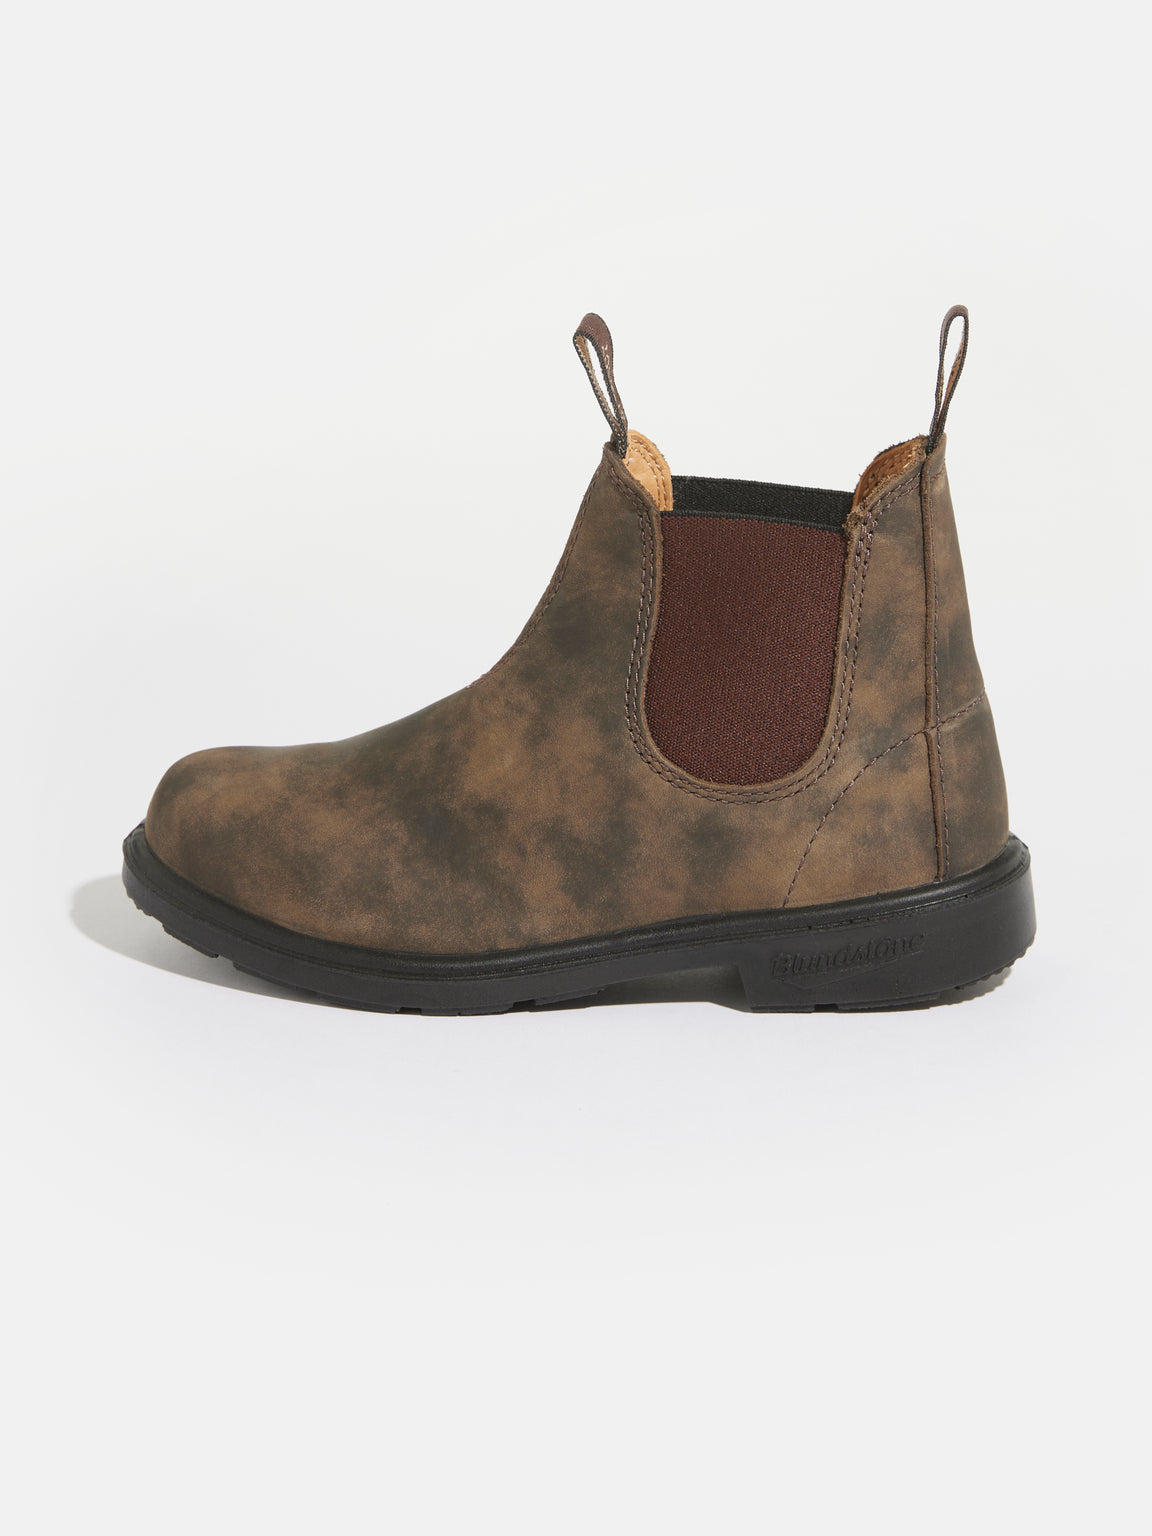 Blundstone 565 Chelsea Boots For Kids